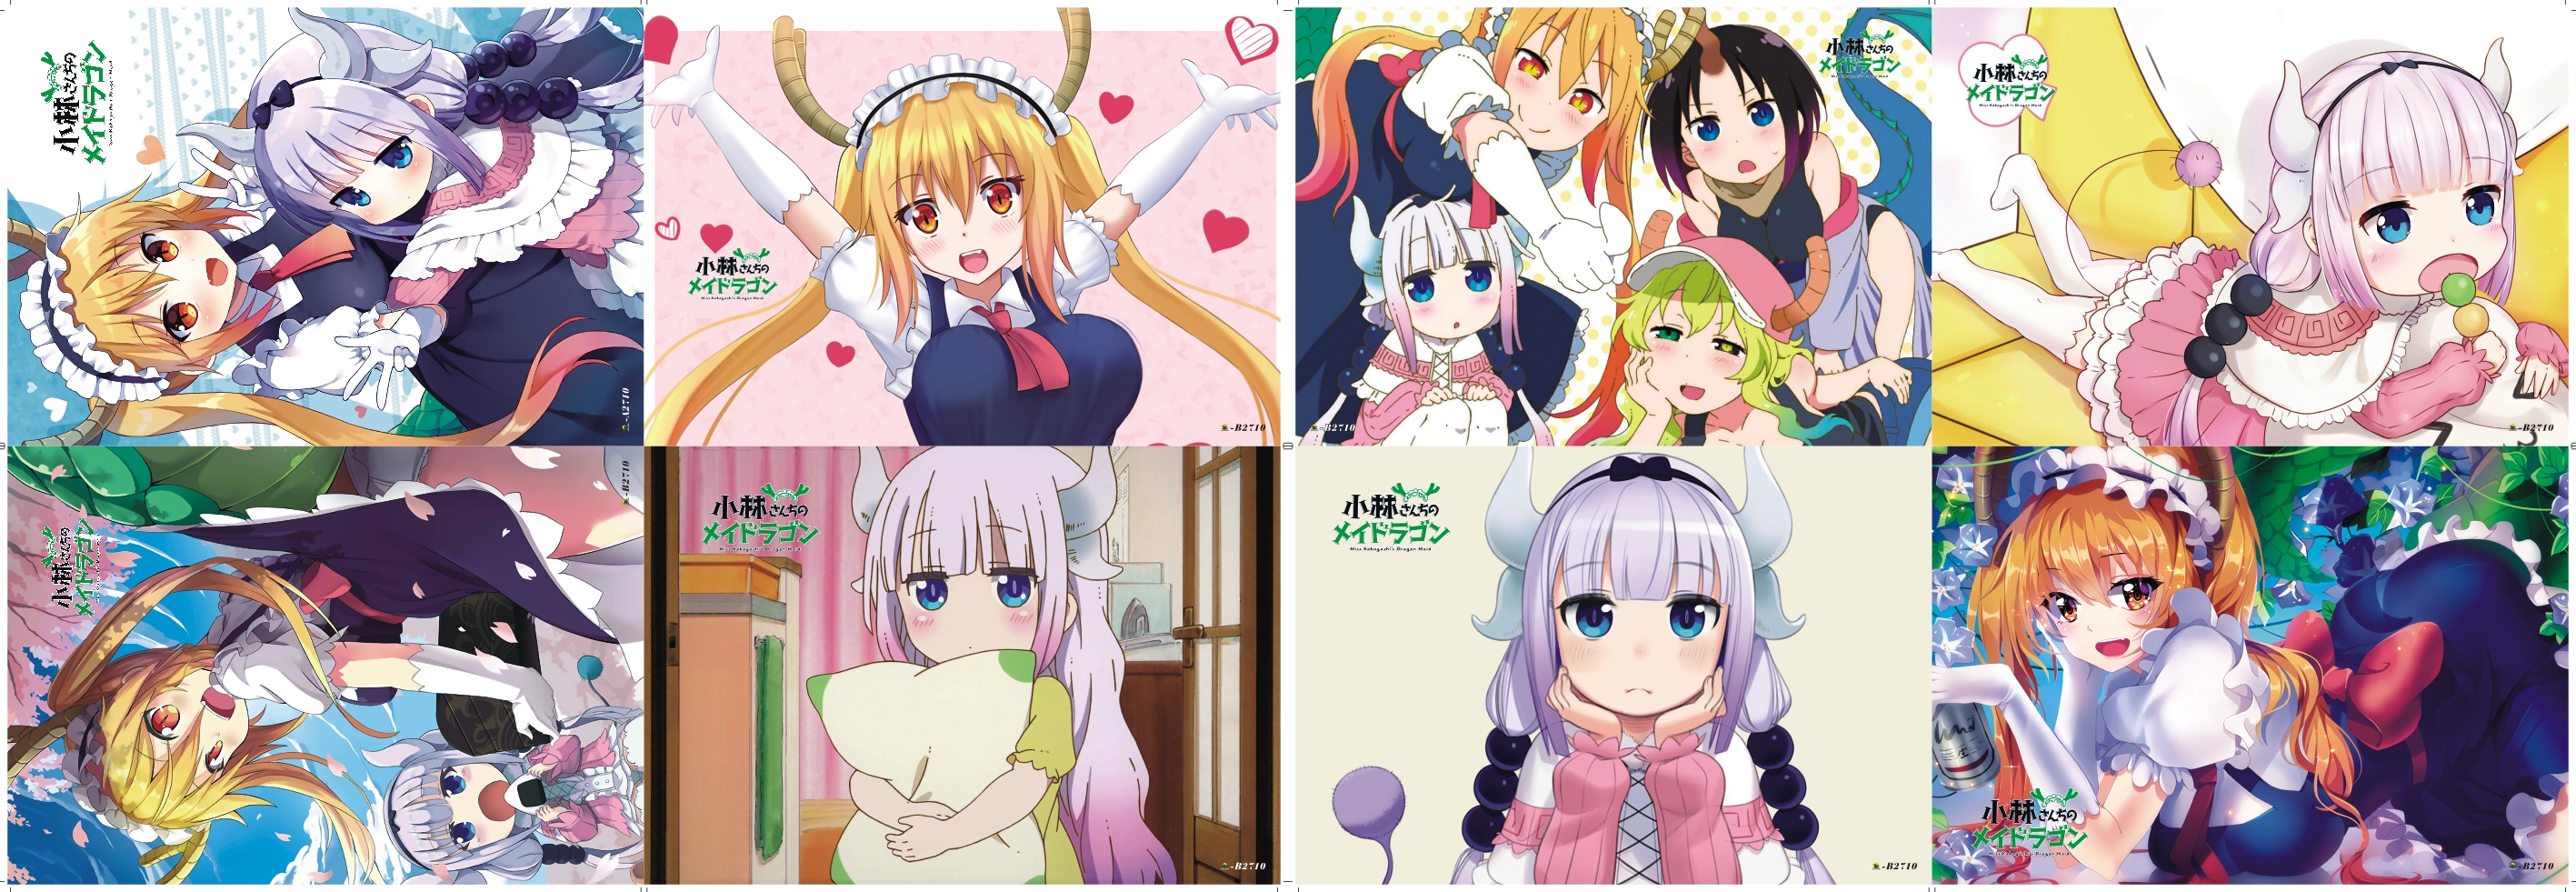 Anime poster price for a set of 8 pcs